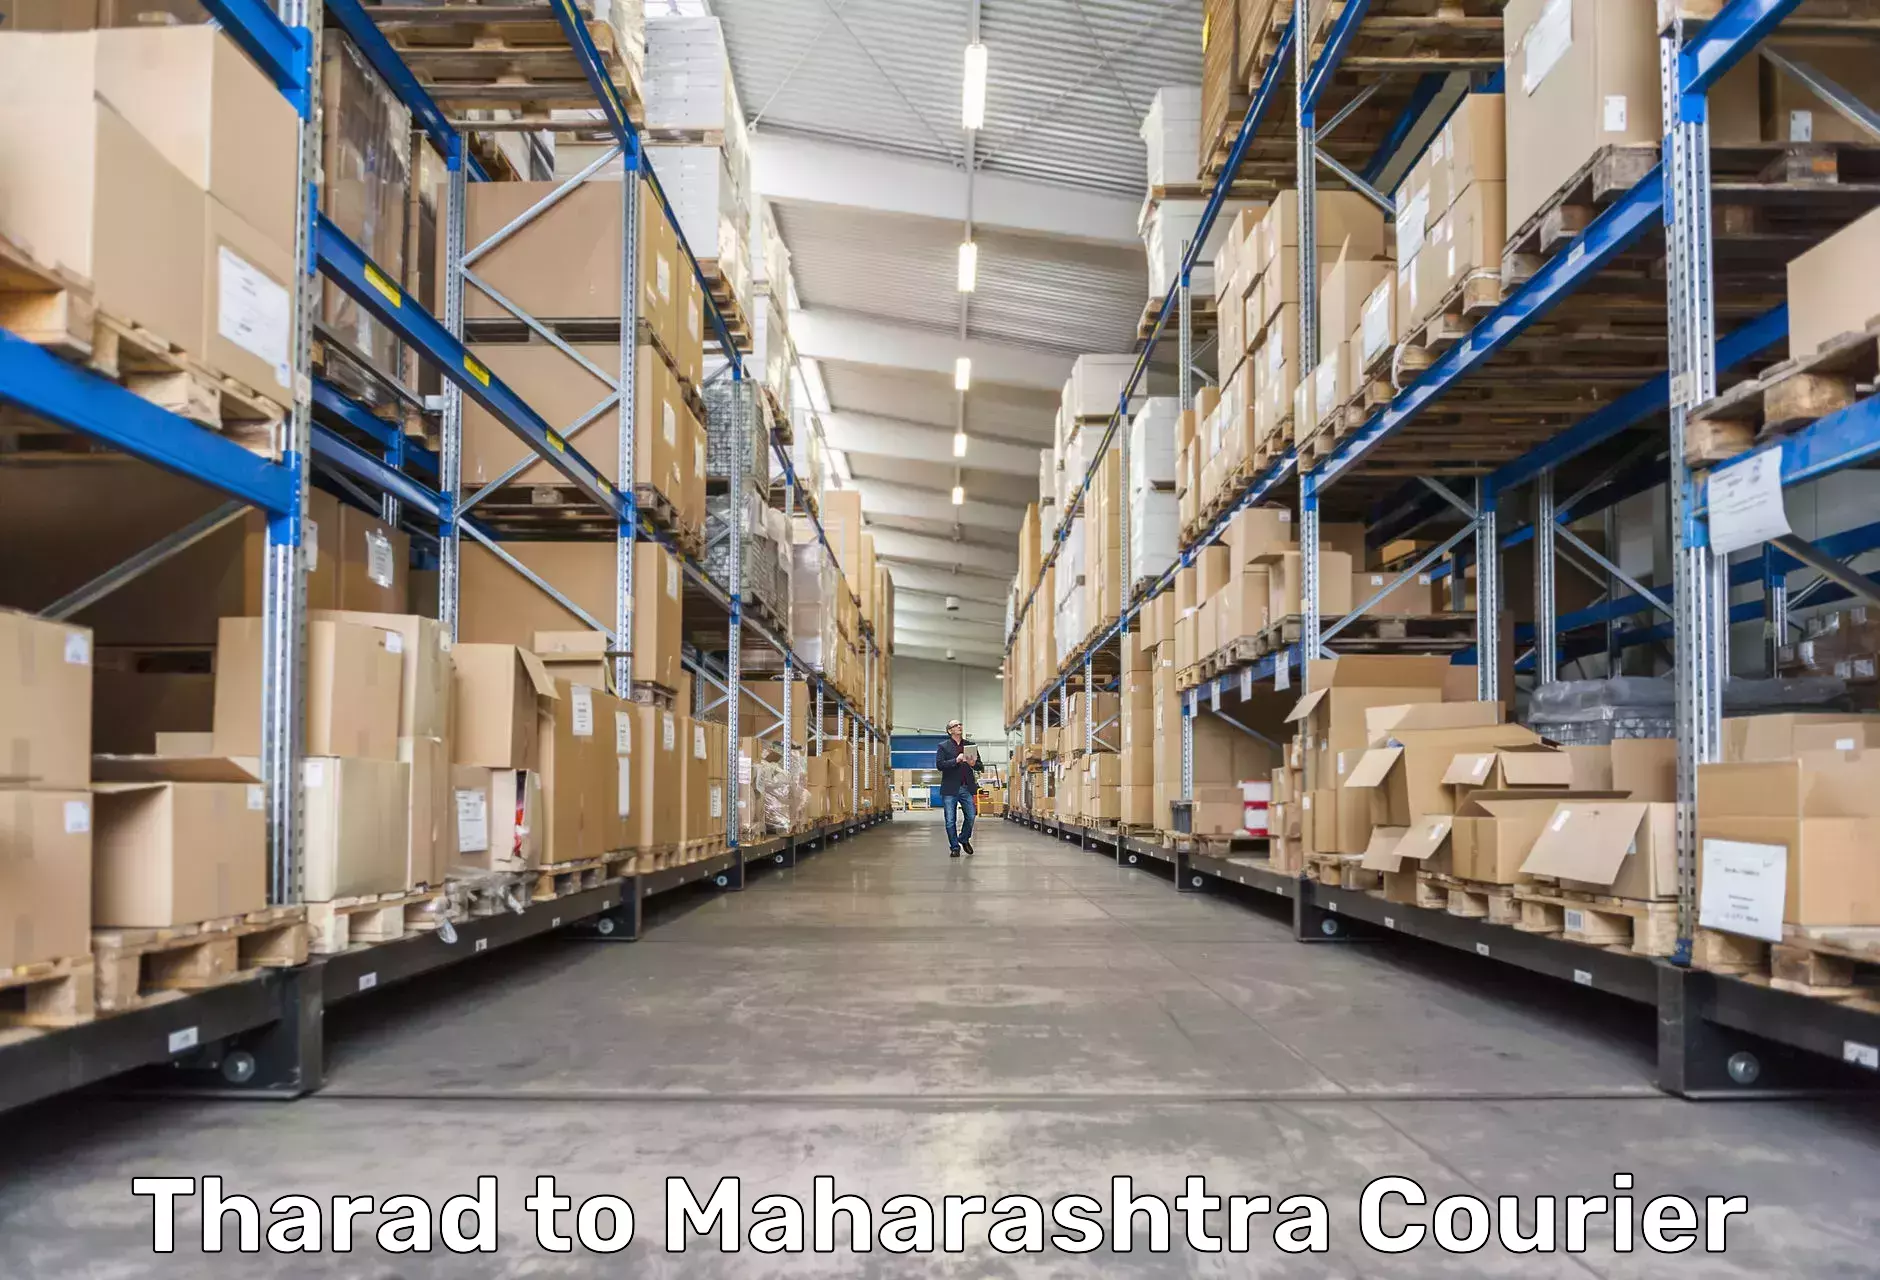 High-priority parcel service Tharad to Ulhasnagar